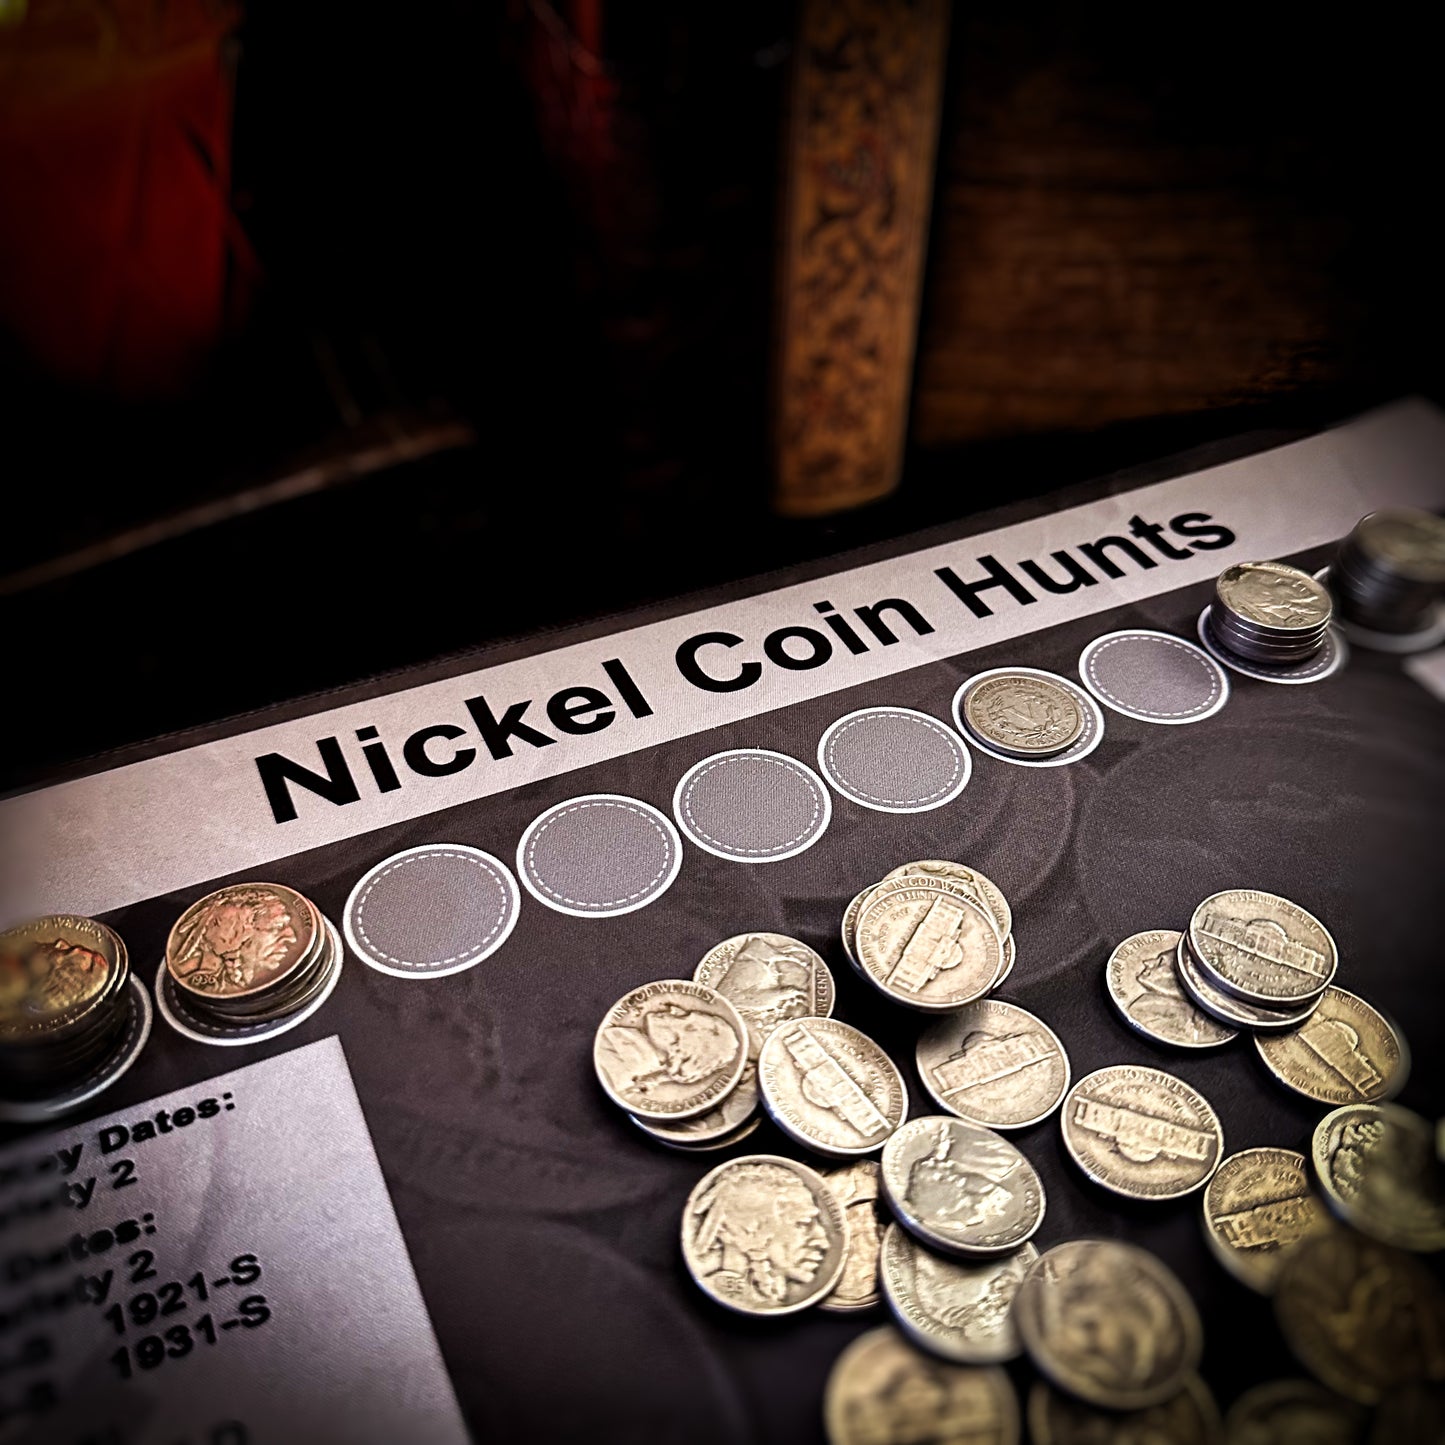 Close up of a layout with coins of a nickel coin roll hunting mat made by Rob Finds Treasure featuring organized rows for stacking nickels, providing a convenient and systematic setup for searching through coins